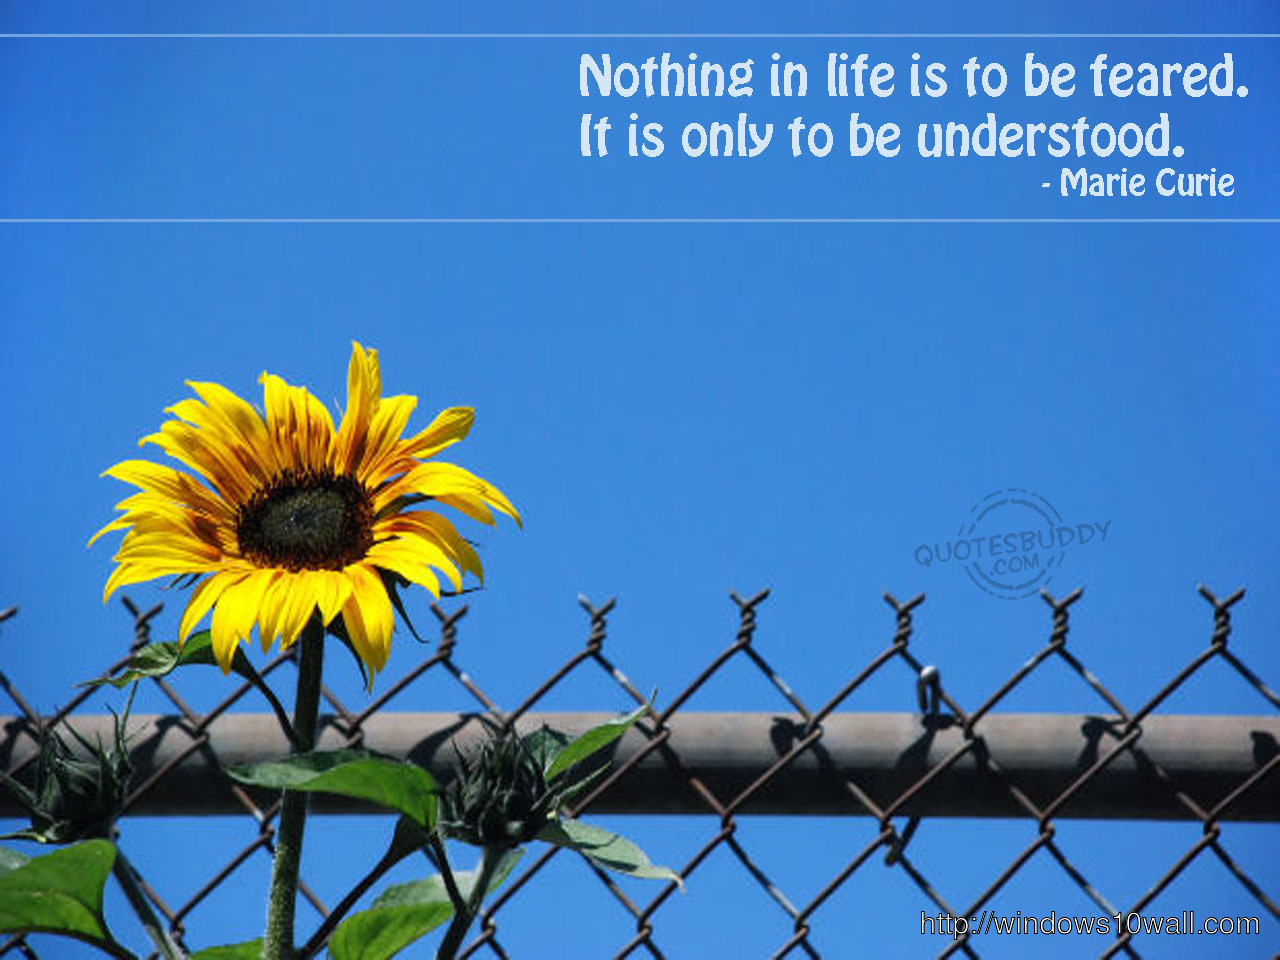 Life Quotes hd Wallpaper free download for desktop